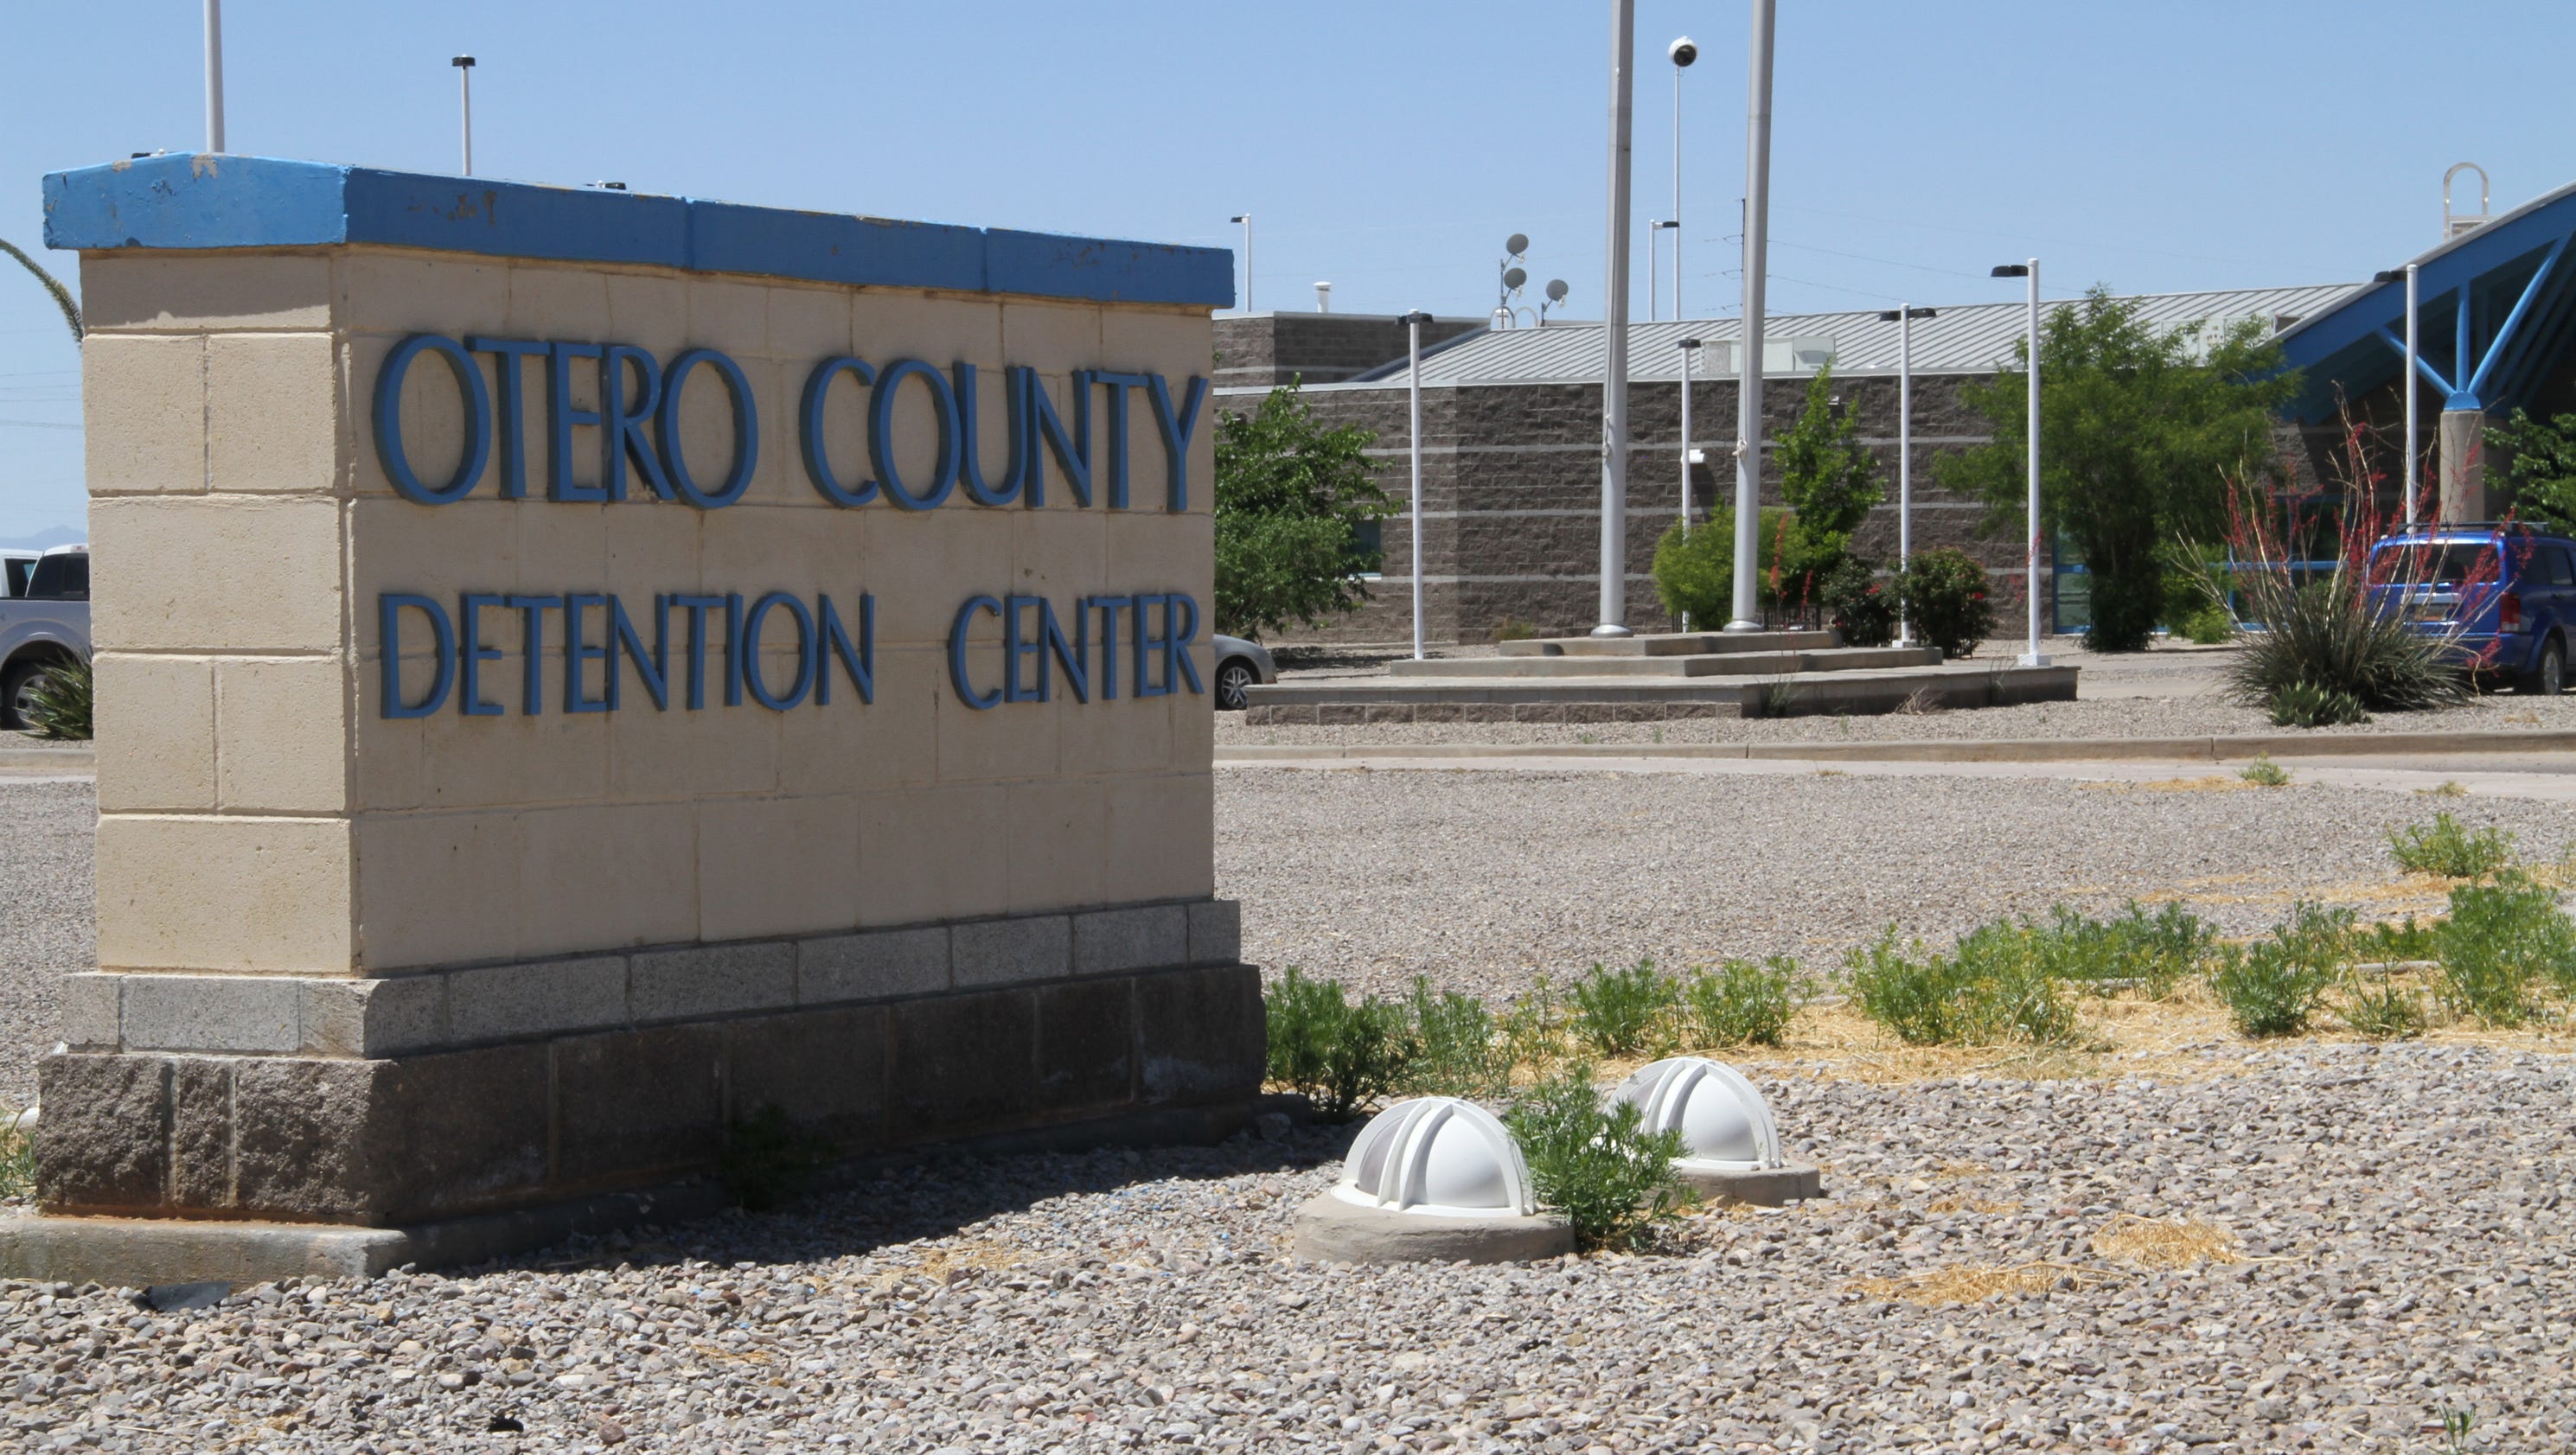 9 inmates accused in Otero County jail assault